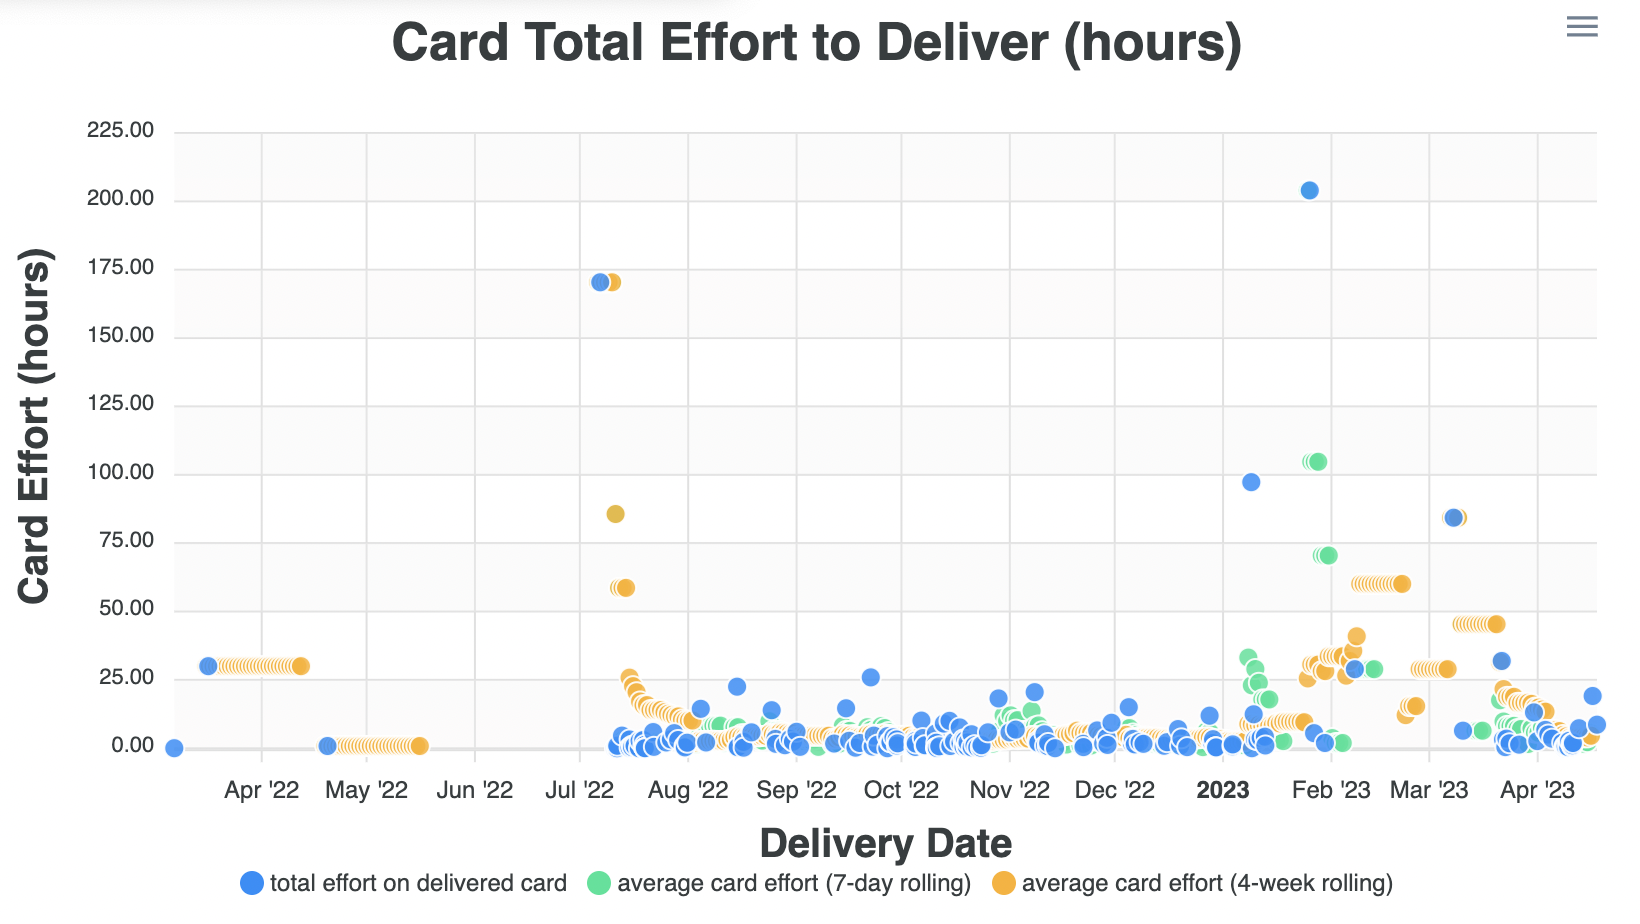 Chart of card effort hours by card delivery date